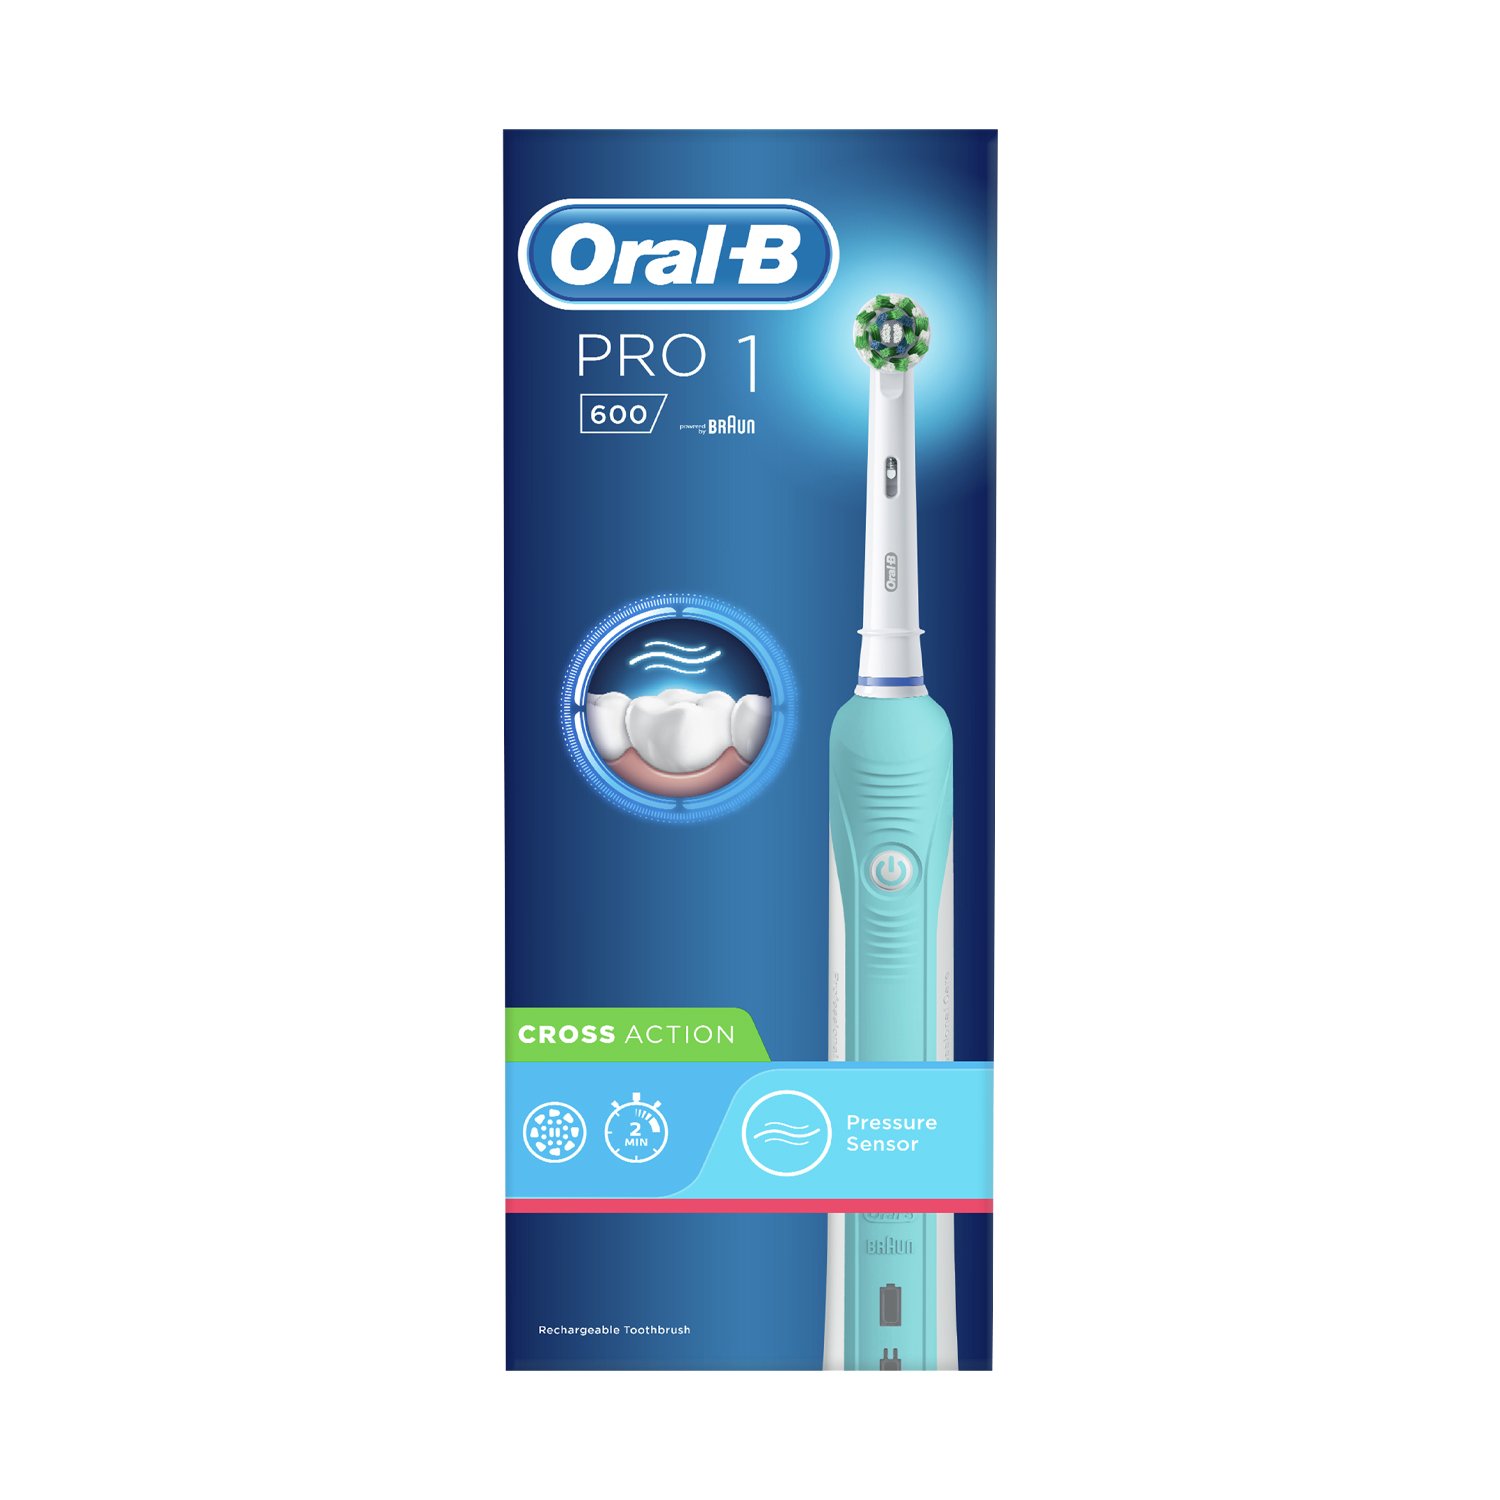 Oral B Pro 1 600 Cross Action Turquoise Design Electric Toothbrush